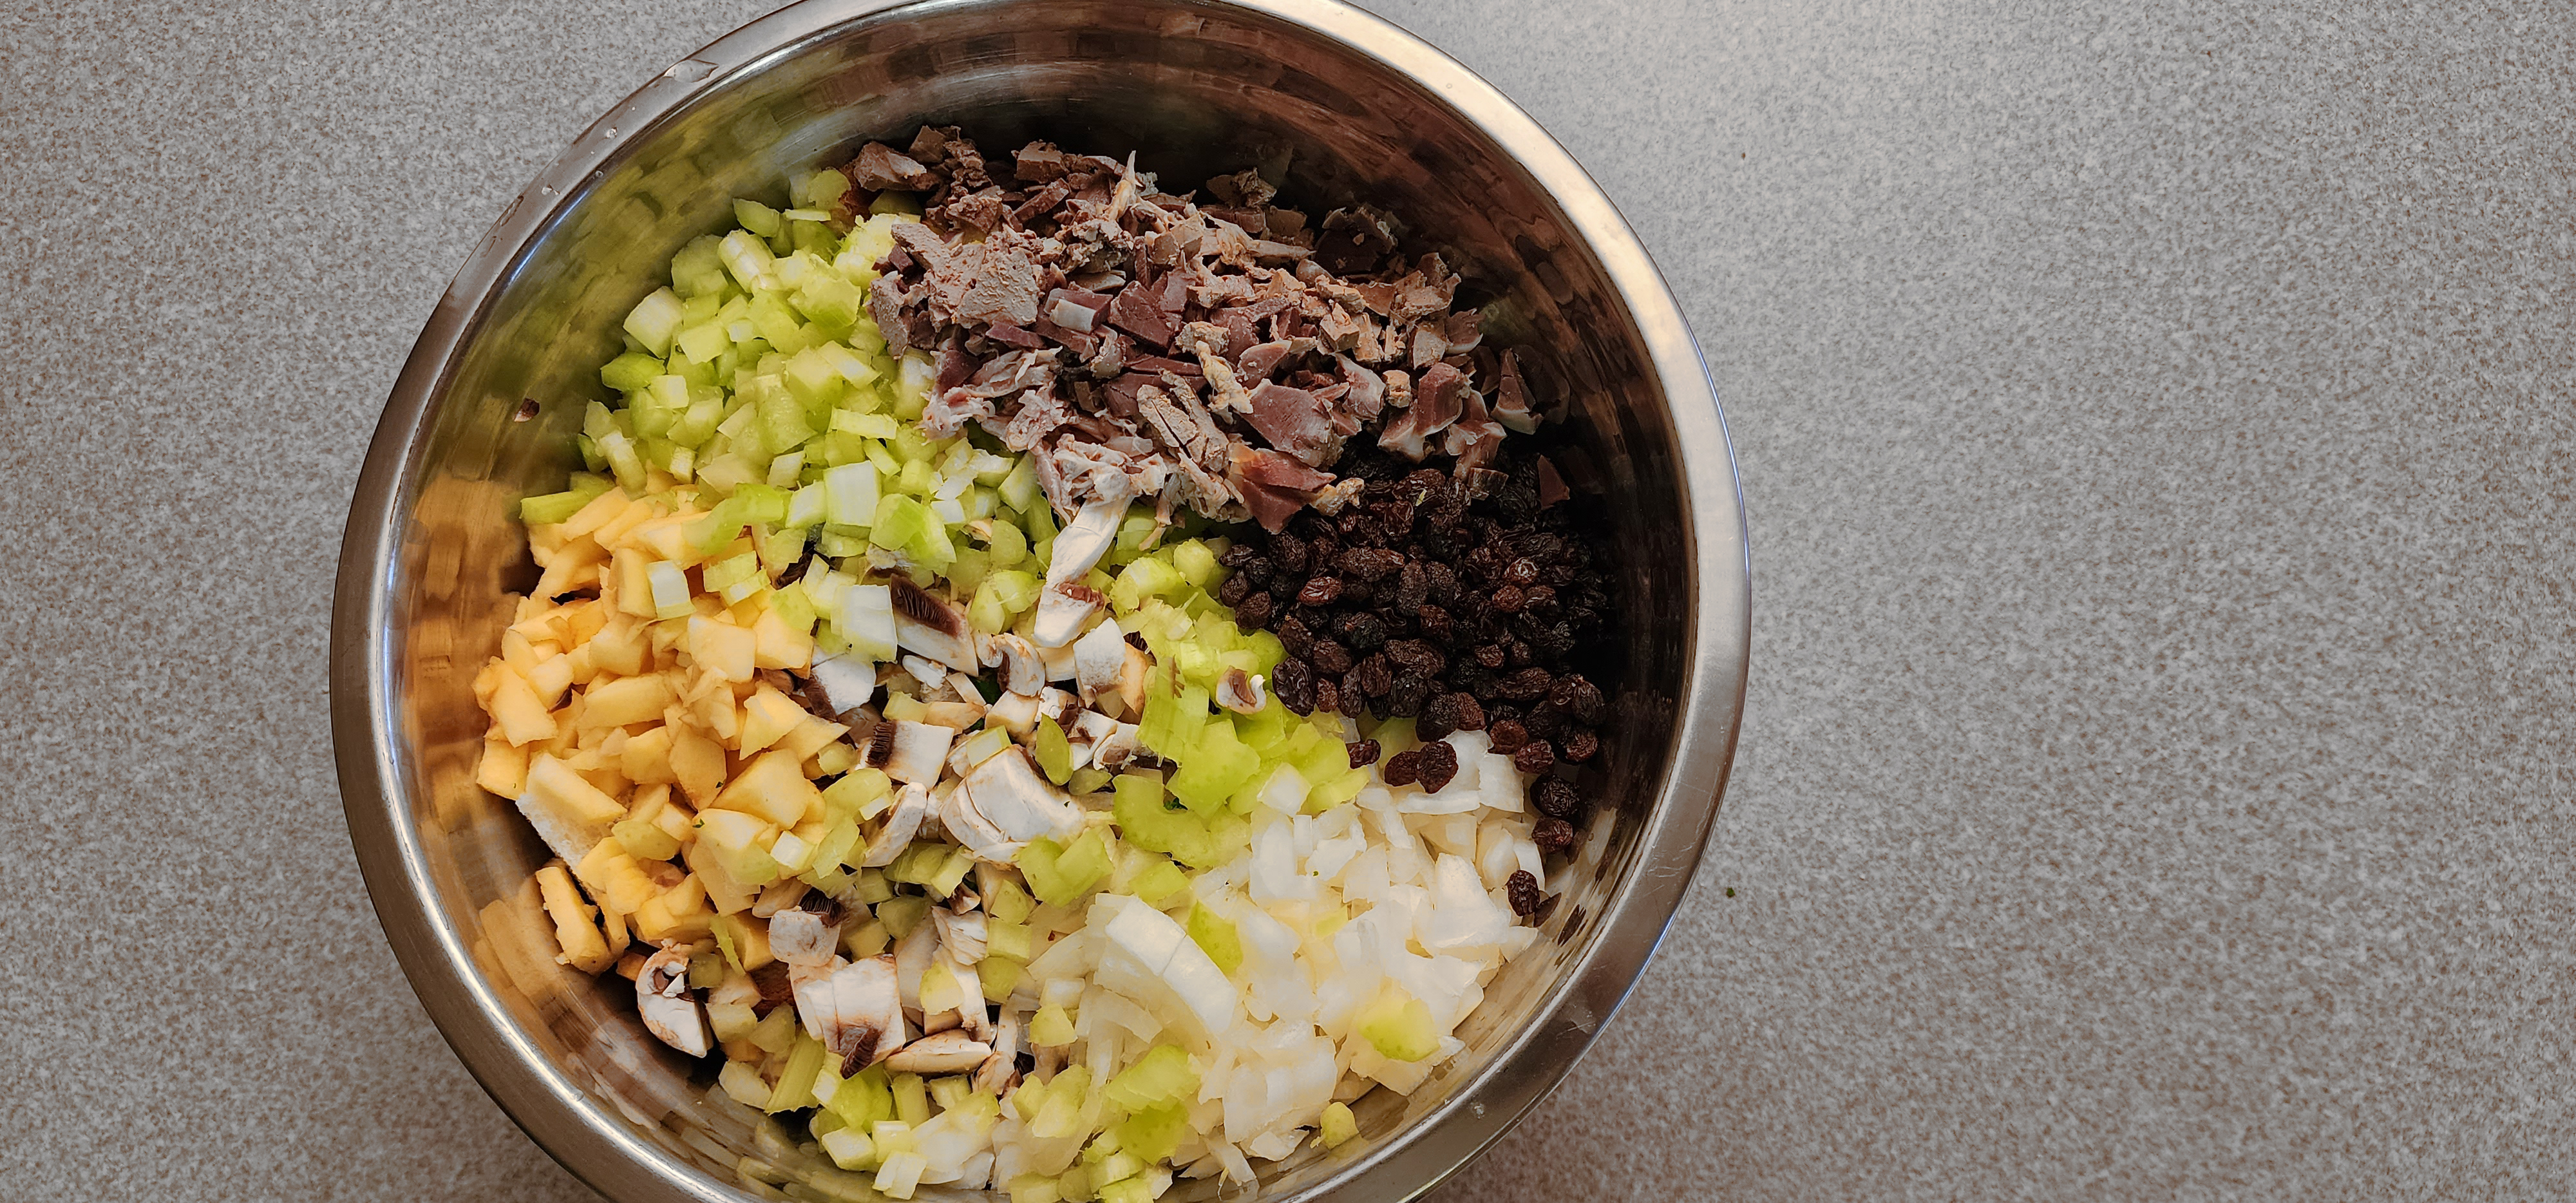 ingredients in the mixing bowl before adding eggs and mixing